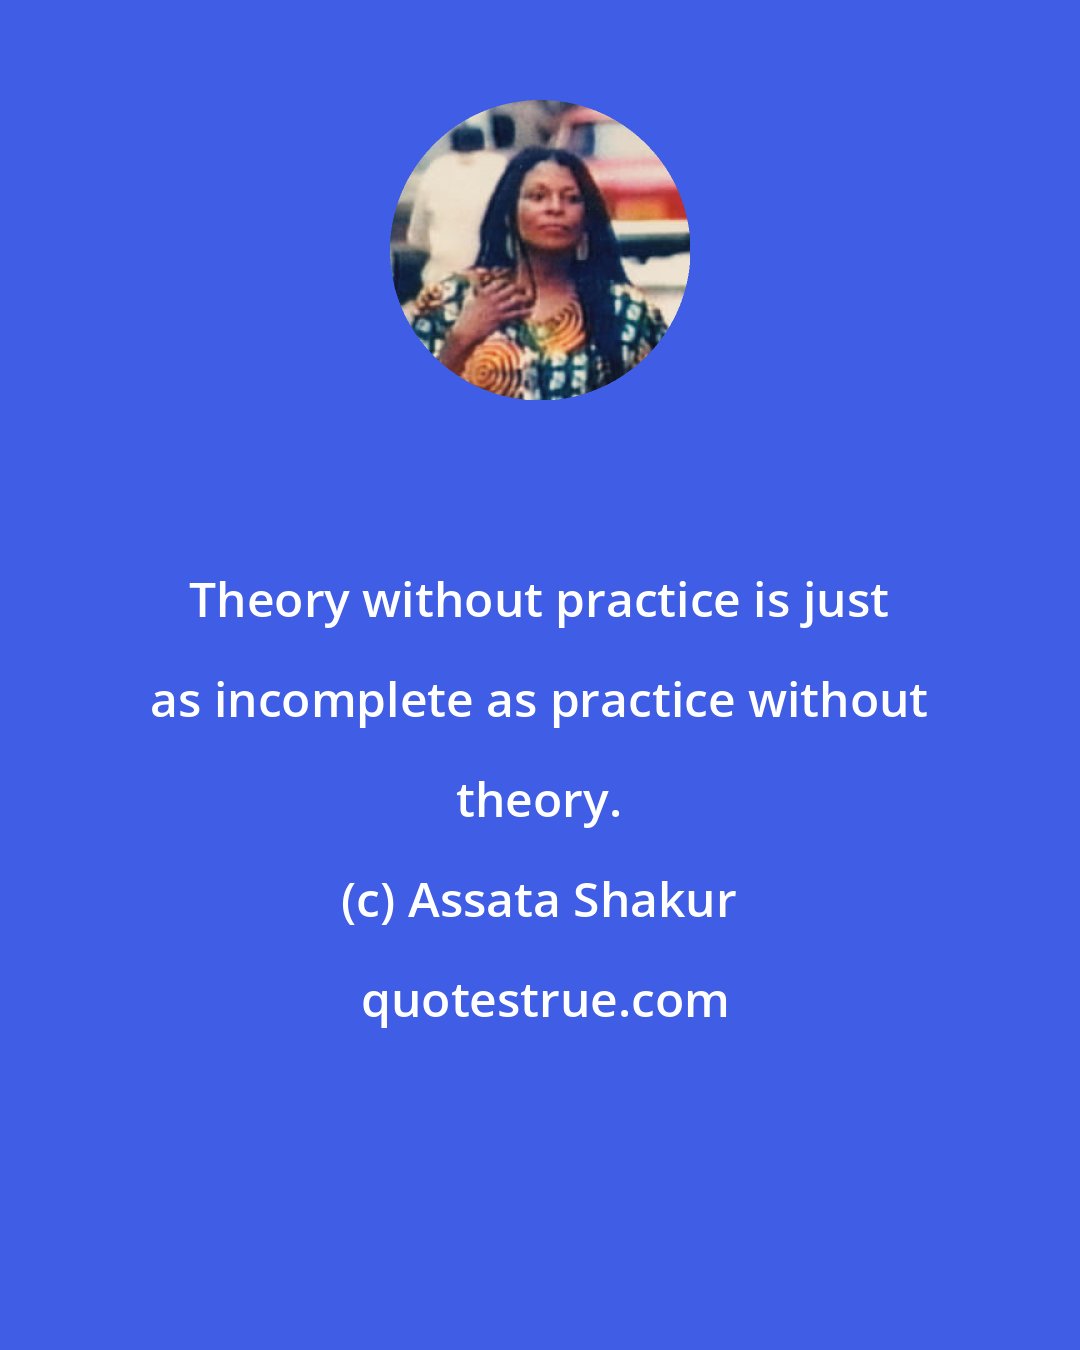 Assata Shakur: Theory without practice is just as incomplete as practice without theory.